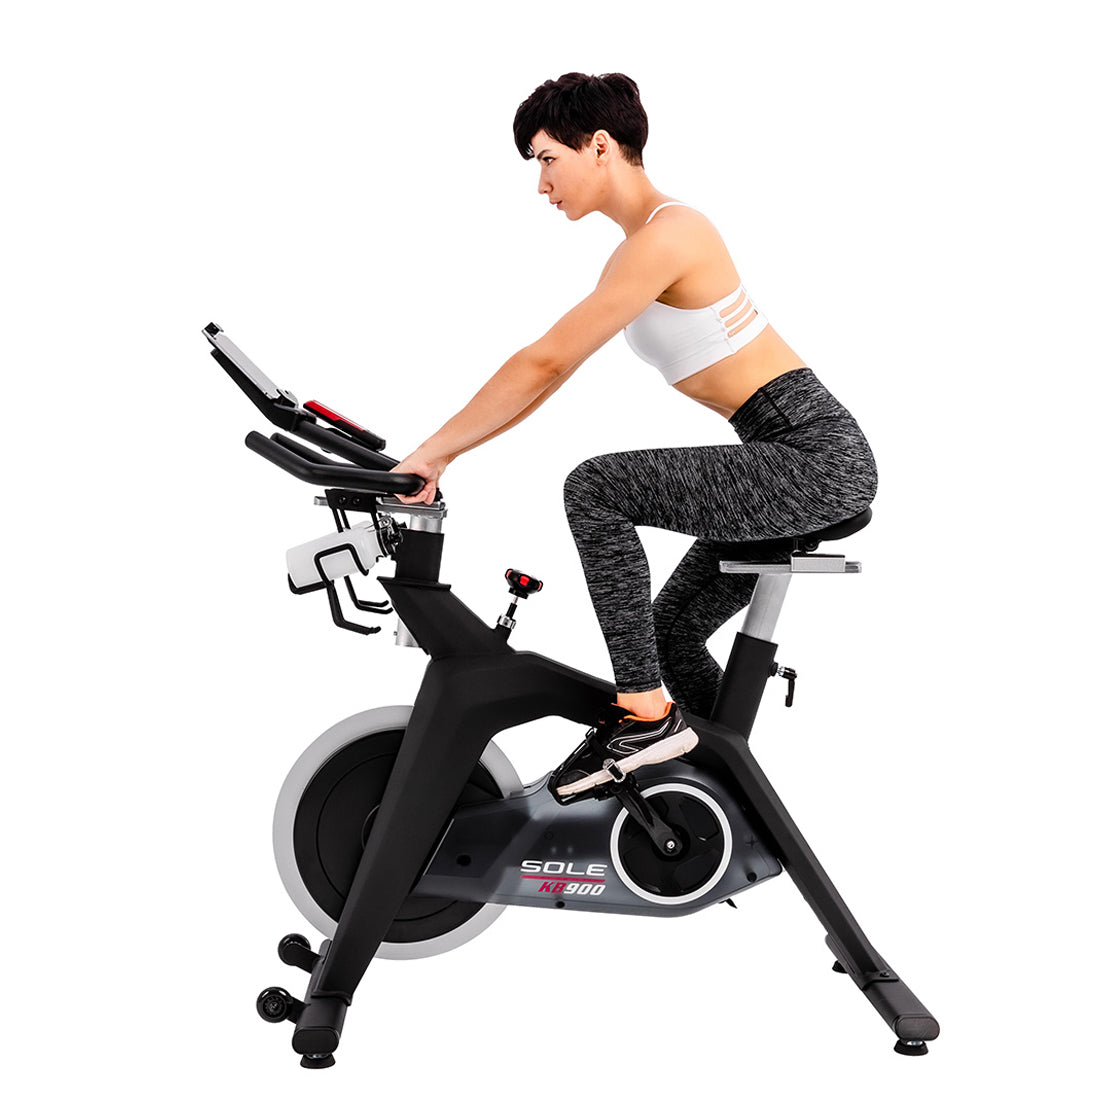 Sole KB900 Spin Exercise Bike